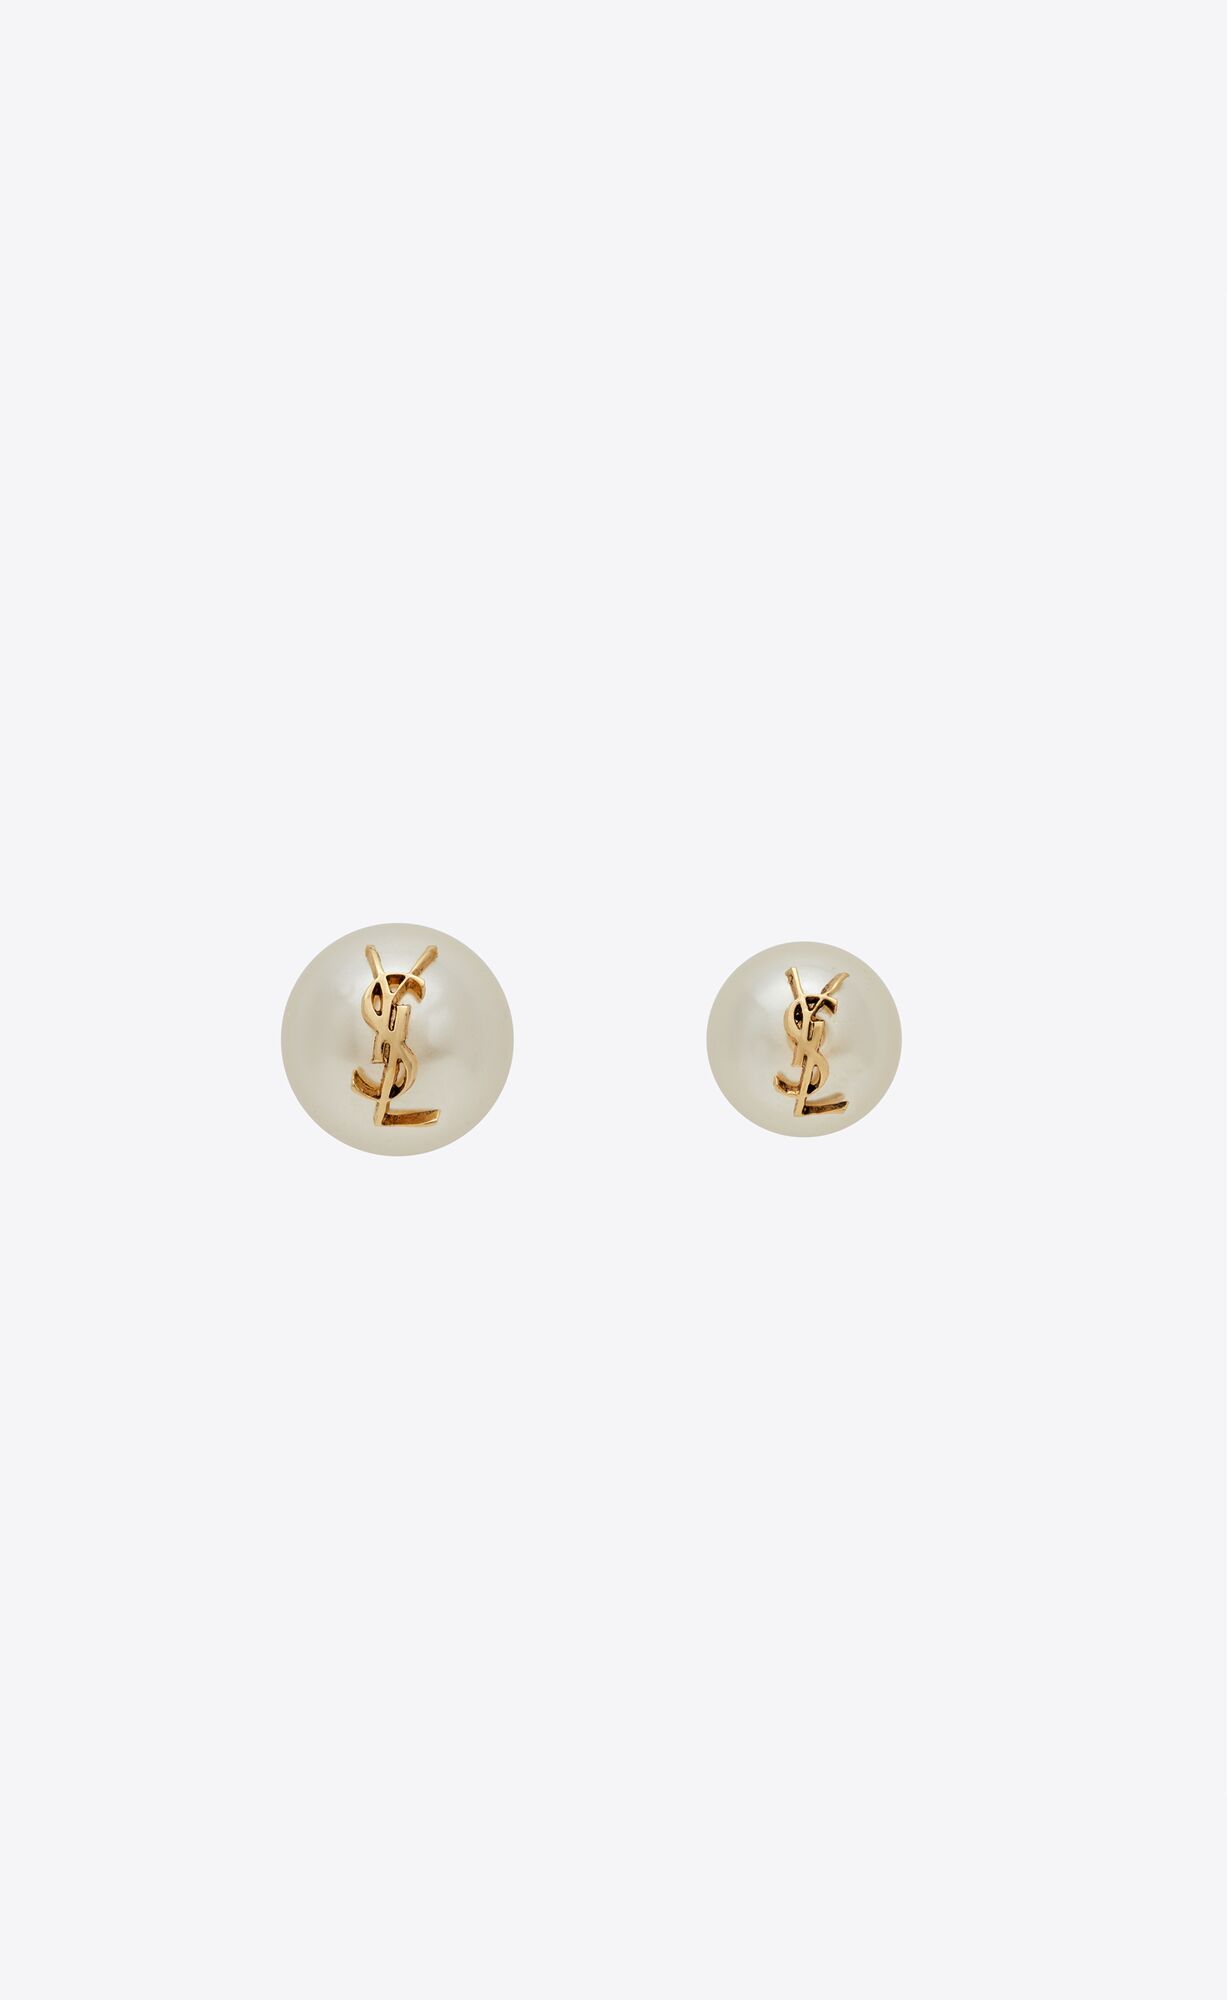 Pair of asymmetric earrings with a small and a large pearl featuring a CASSANDRE. | Saint Laurent Inc. (Global)